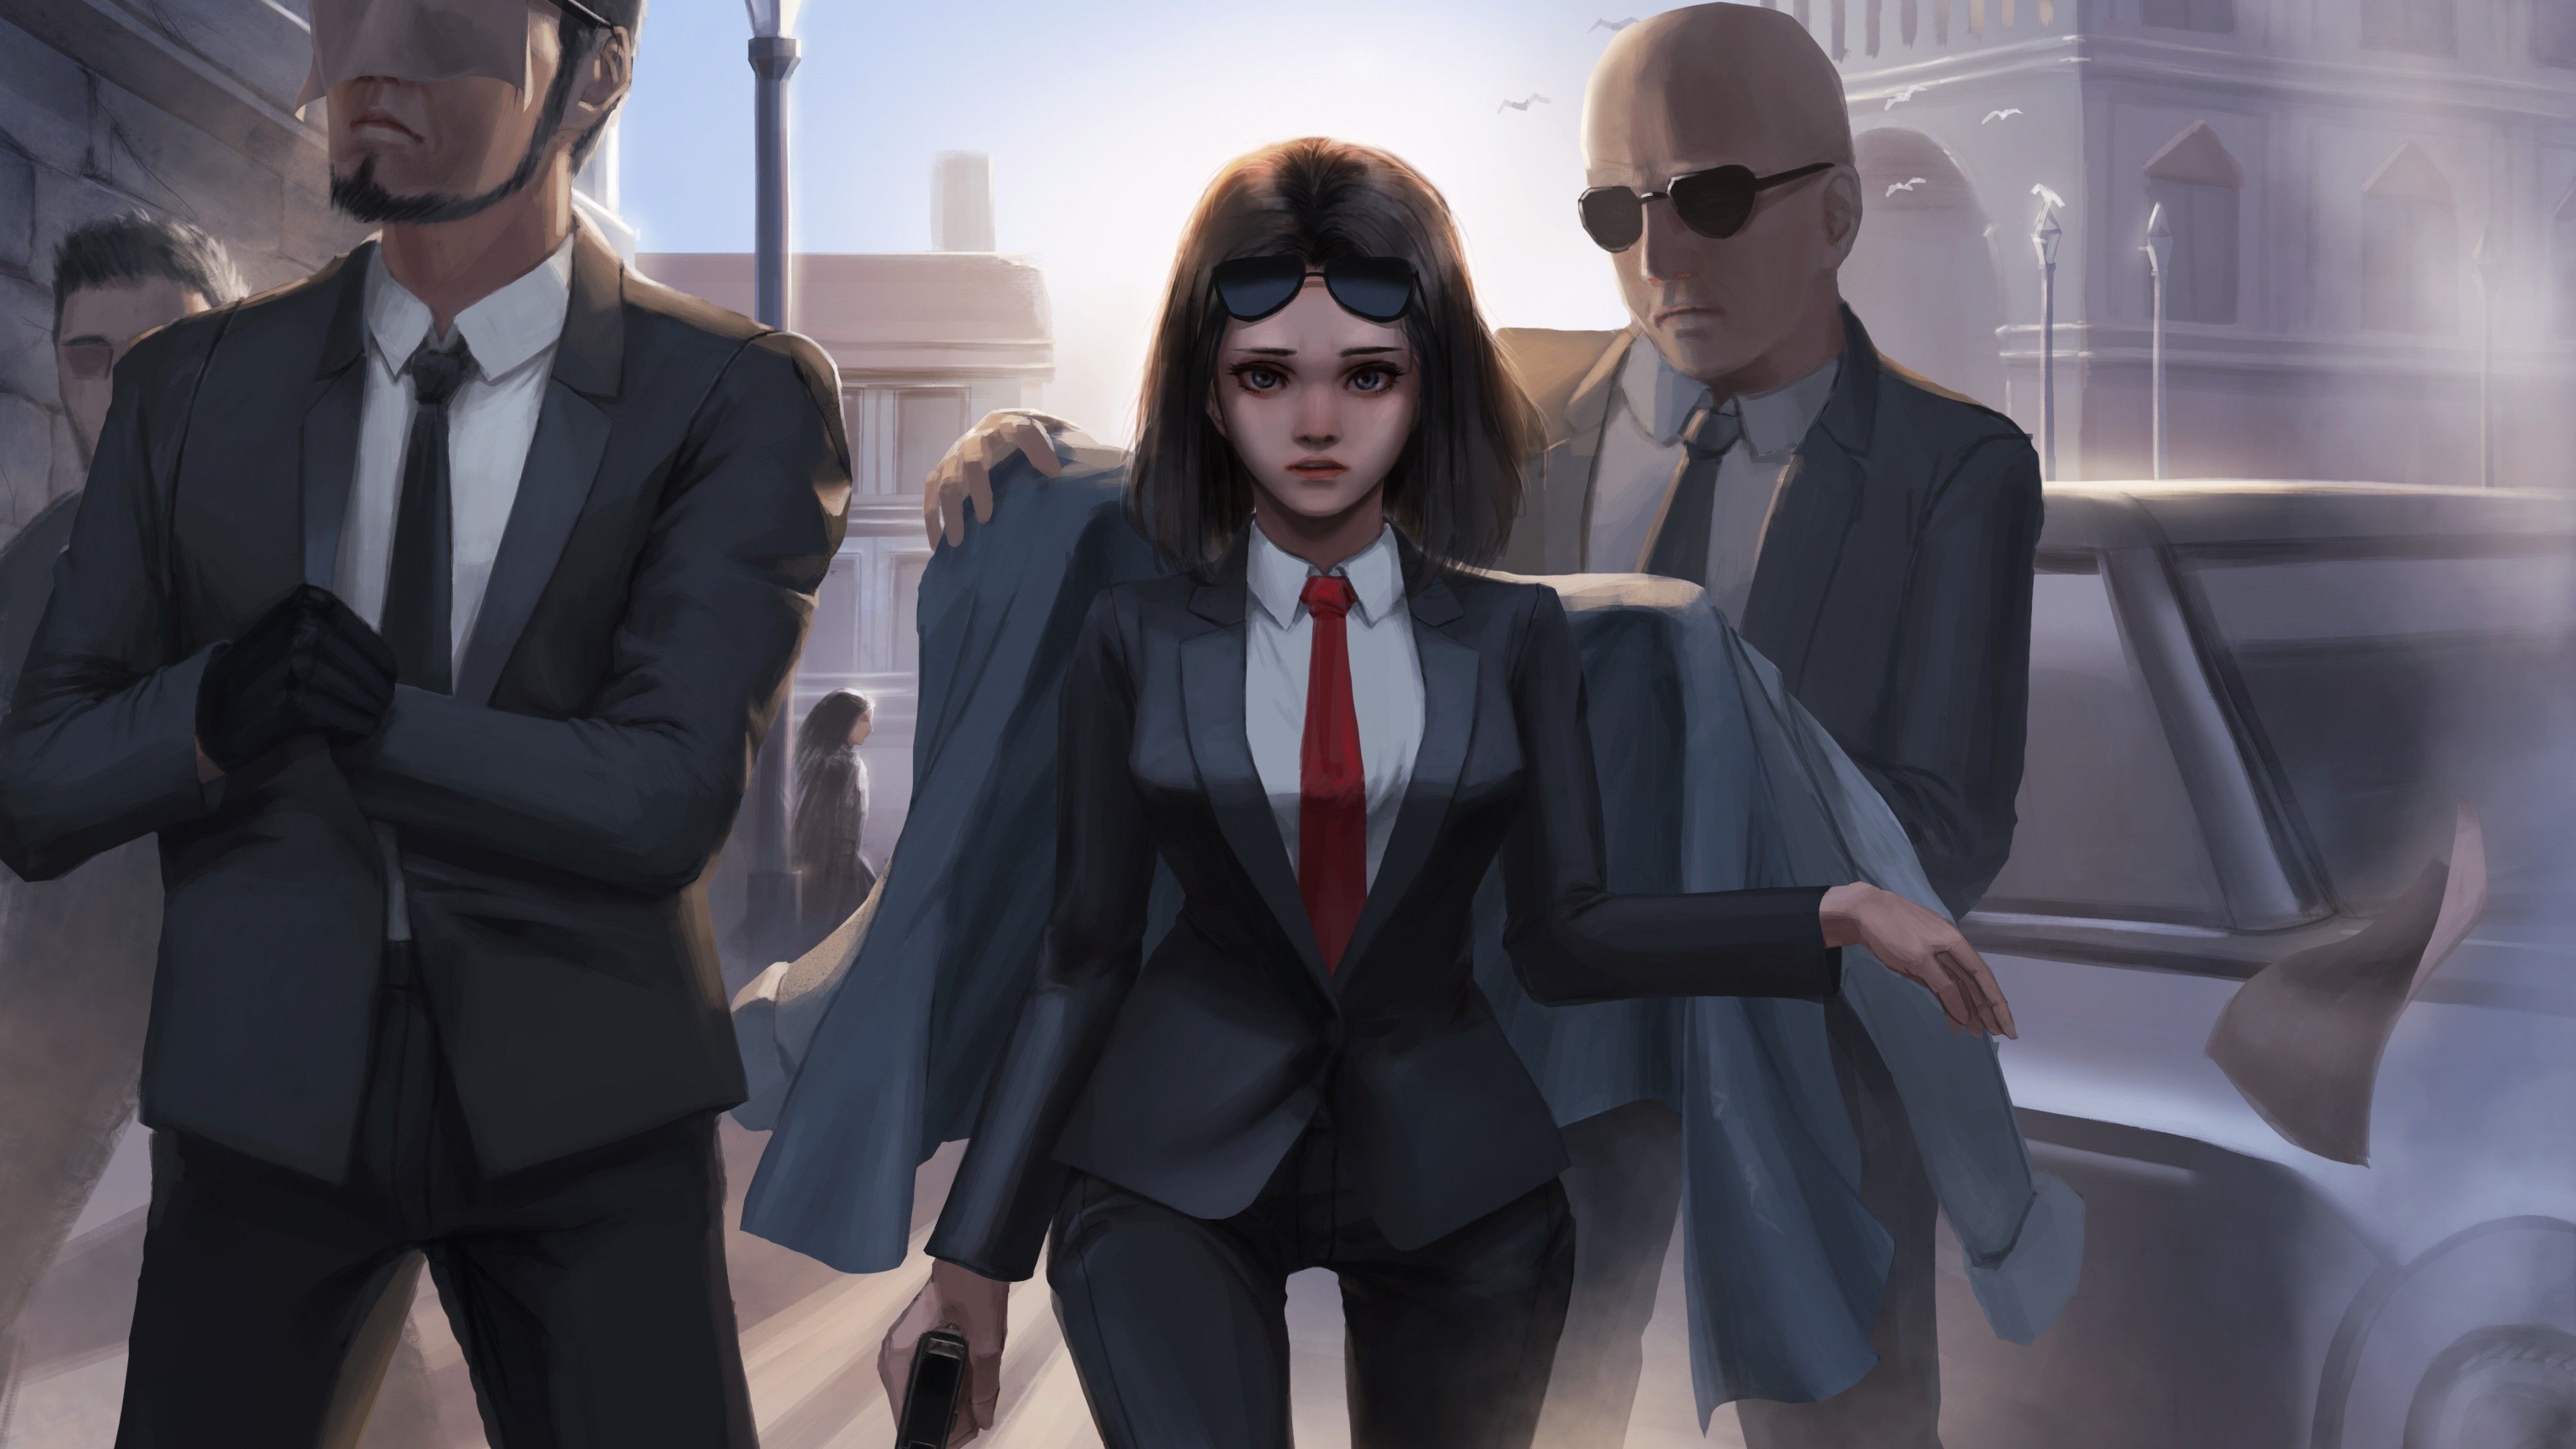 Lexica  High resolution artwork of Anime Girl suit and tie